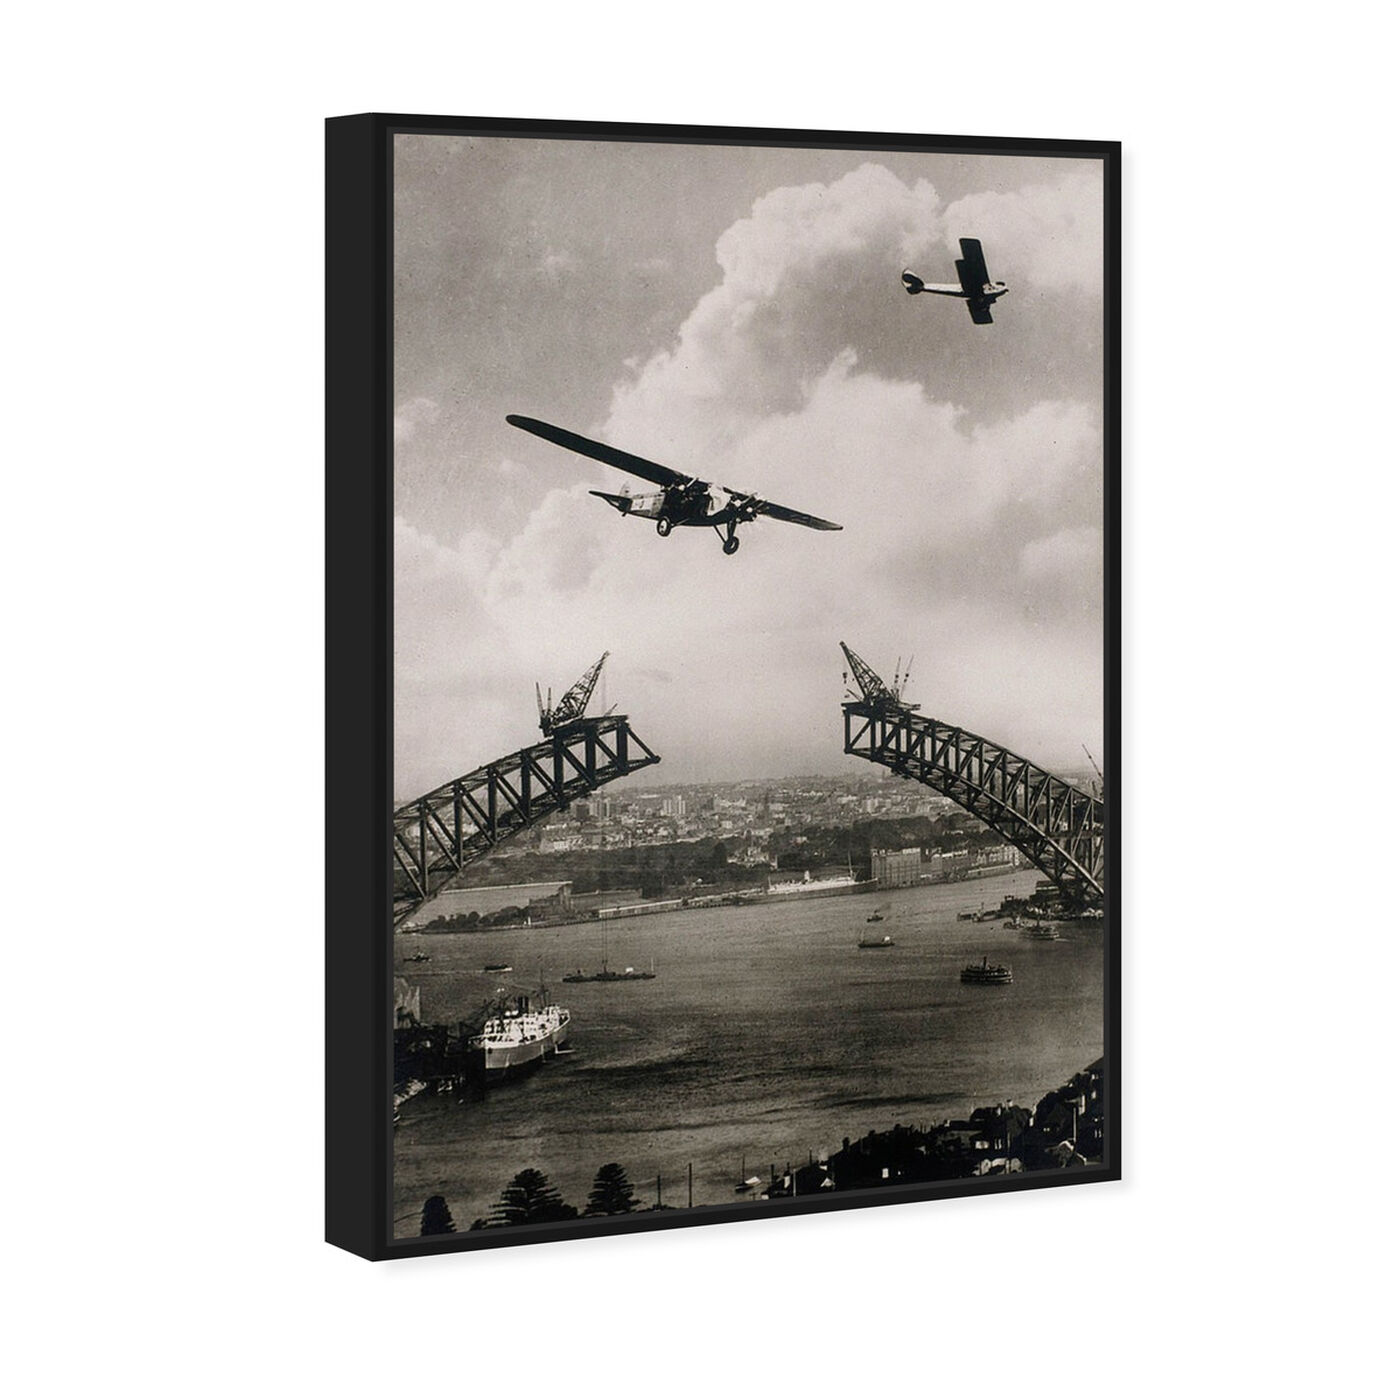 Angled view of Sydney Harbour Bridge - The Art Cabinet featuring transportation and airplanes art.